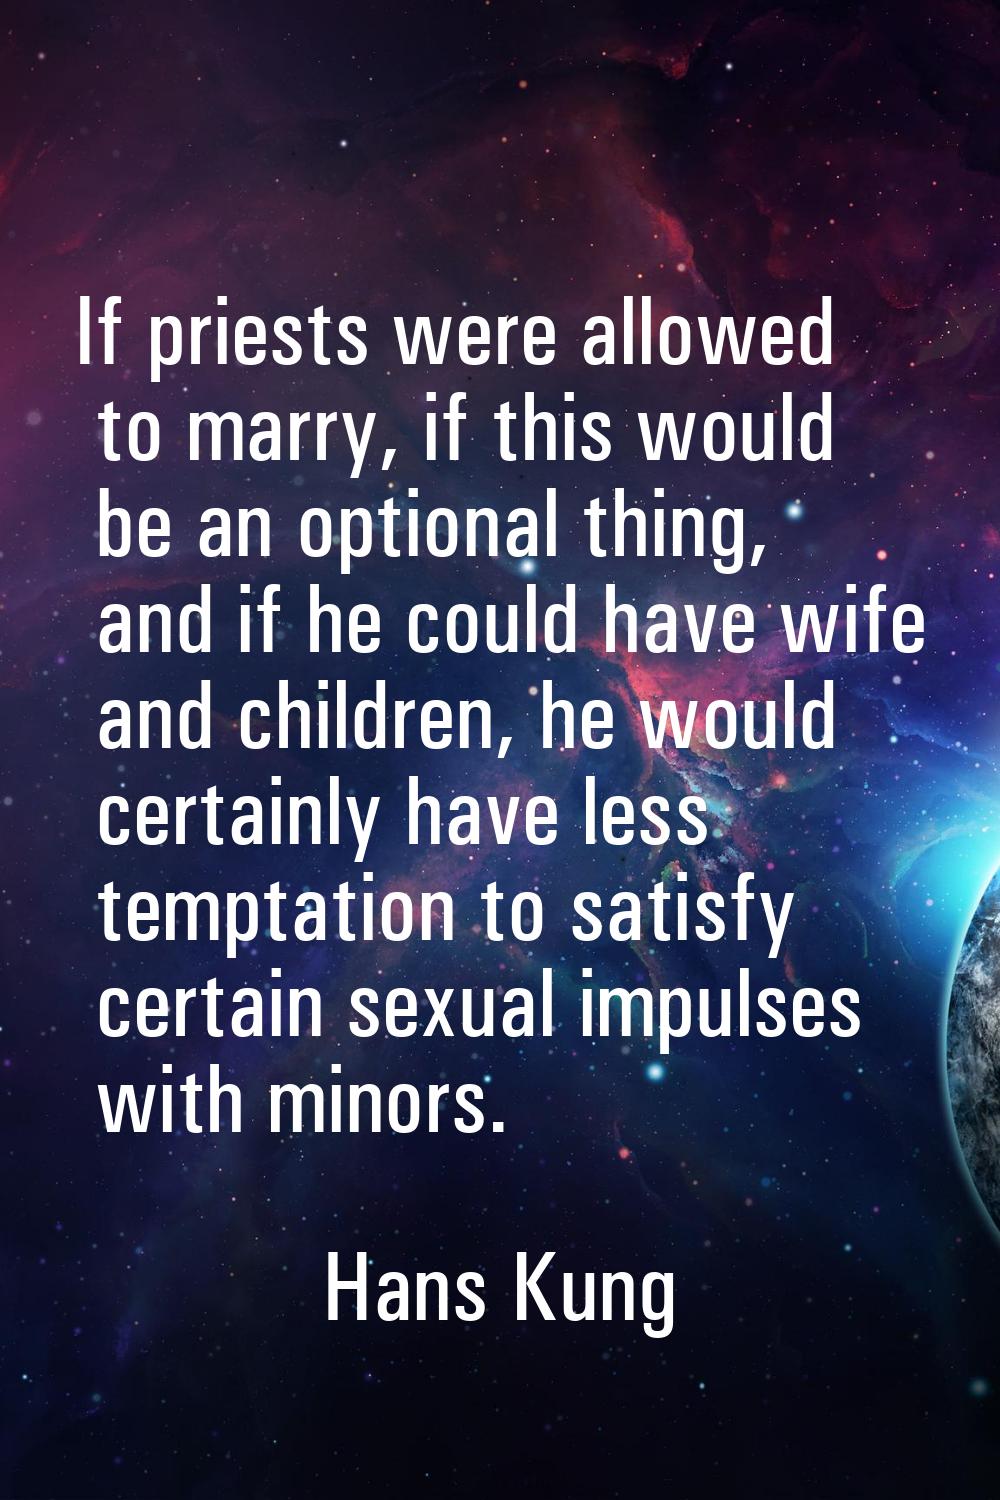 If priests were allowed to marry, if this would be an optional thing, and if he could have wife and